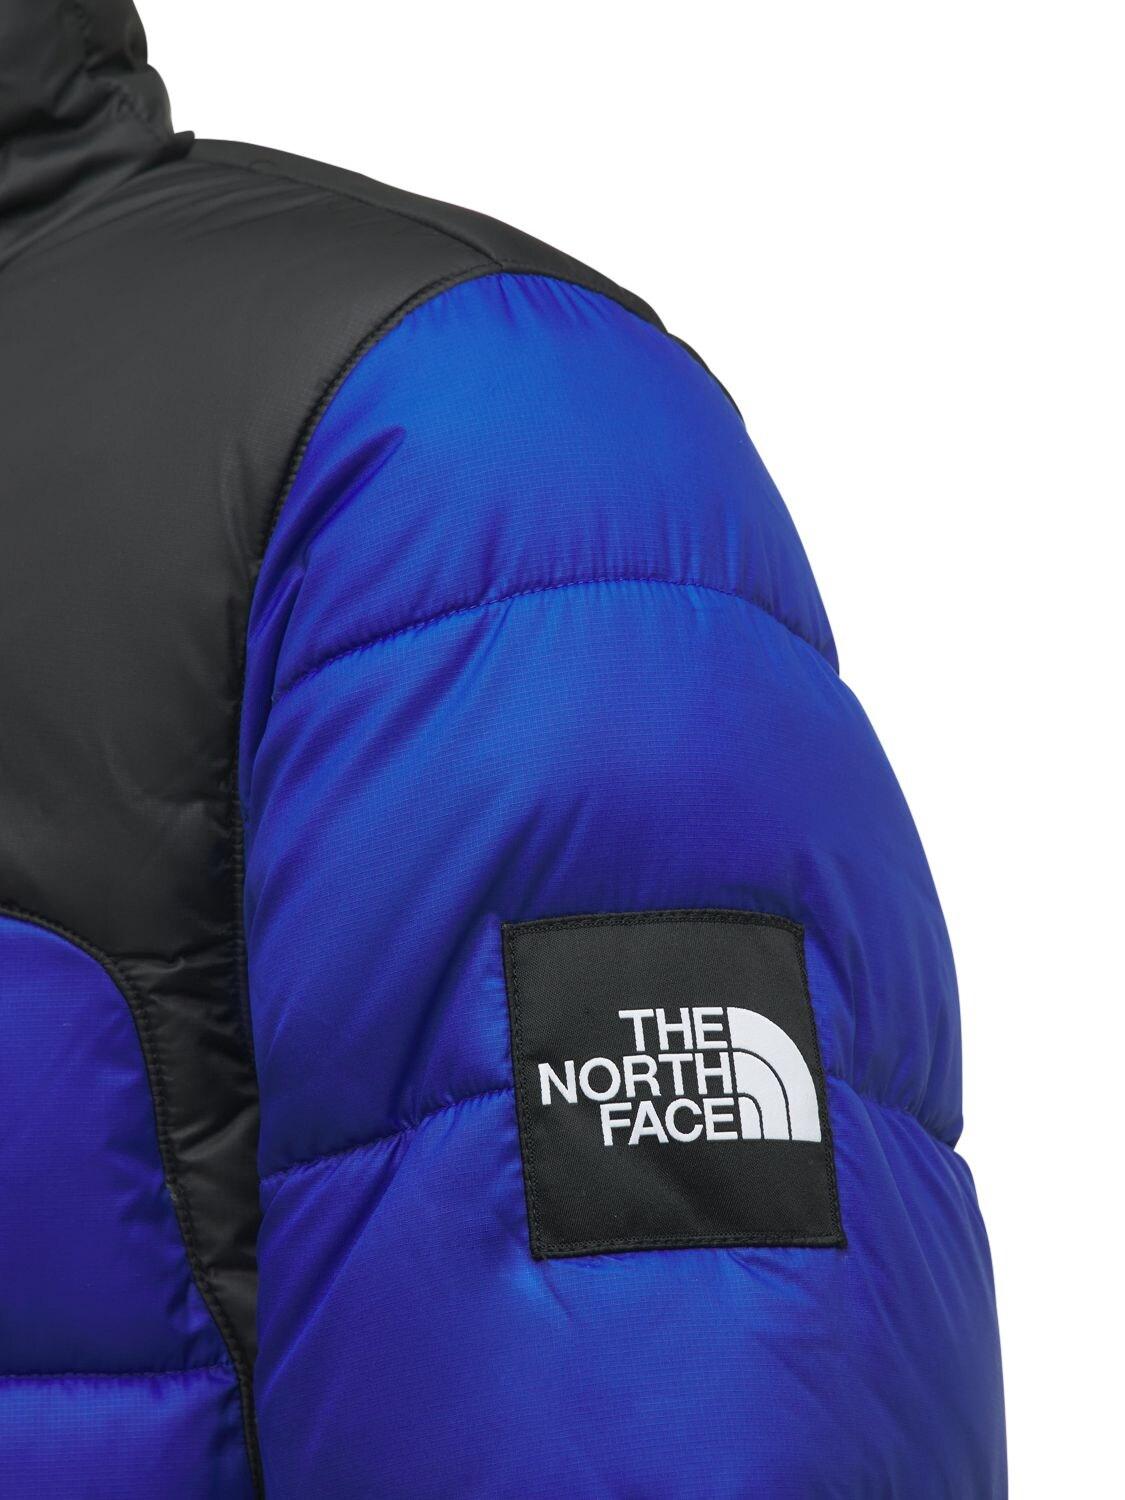 The North Face Bb Search & Rescue Insulated Jacket in Blue for Men 